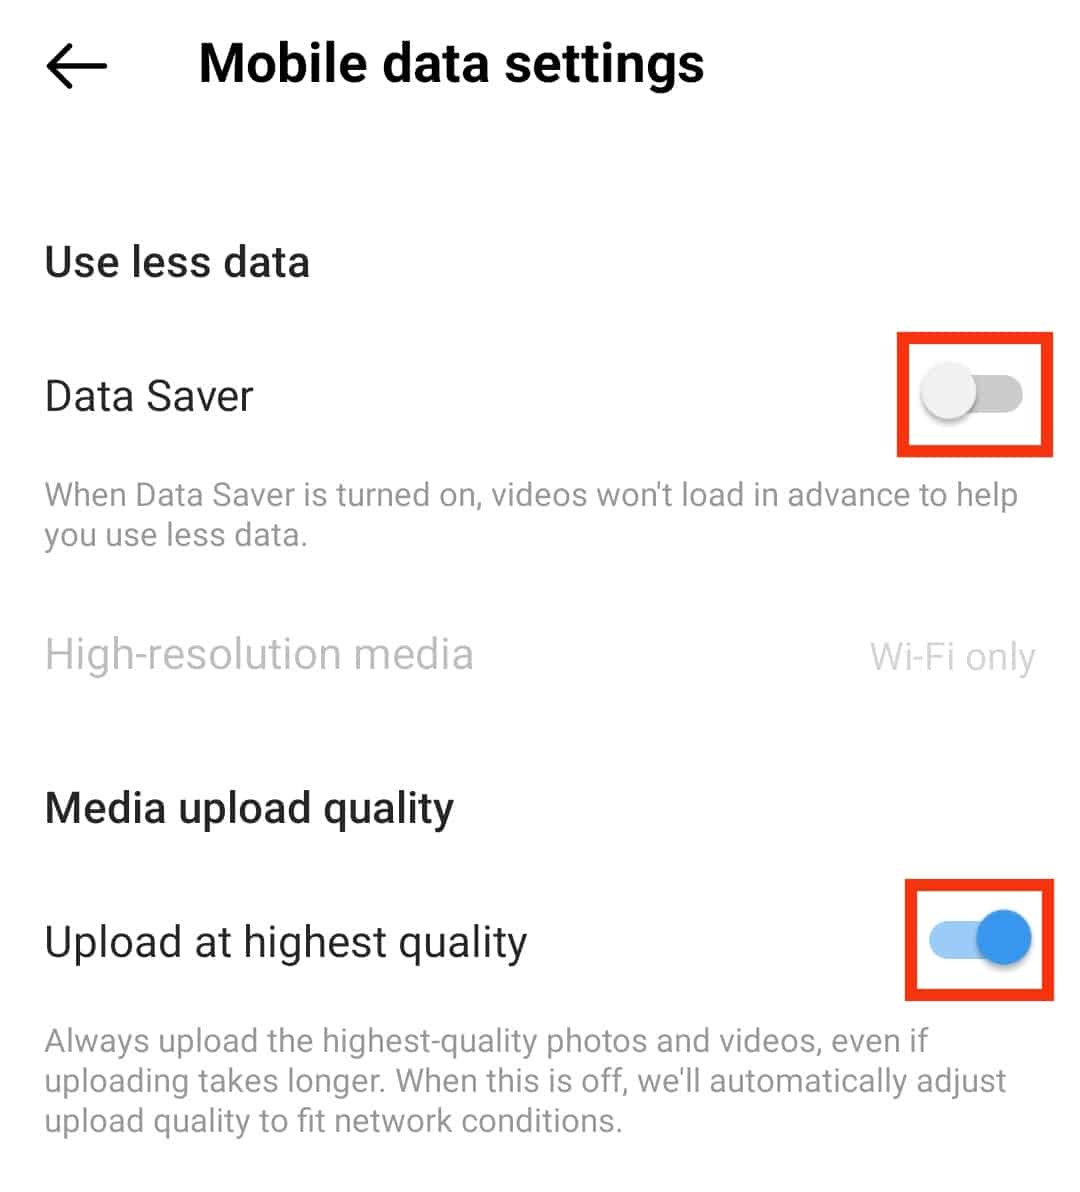 Turn Off The Data Saver And Enable The High Quality Media Upload